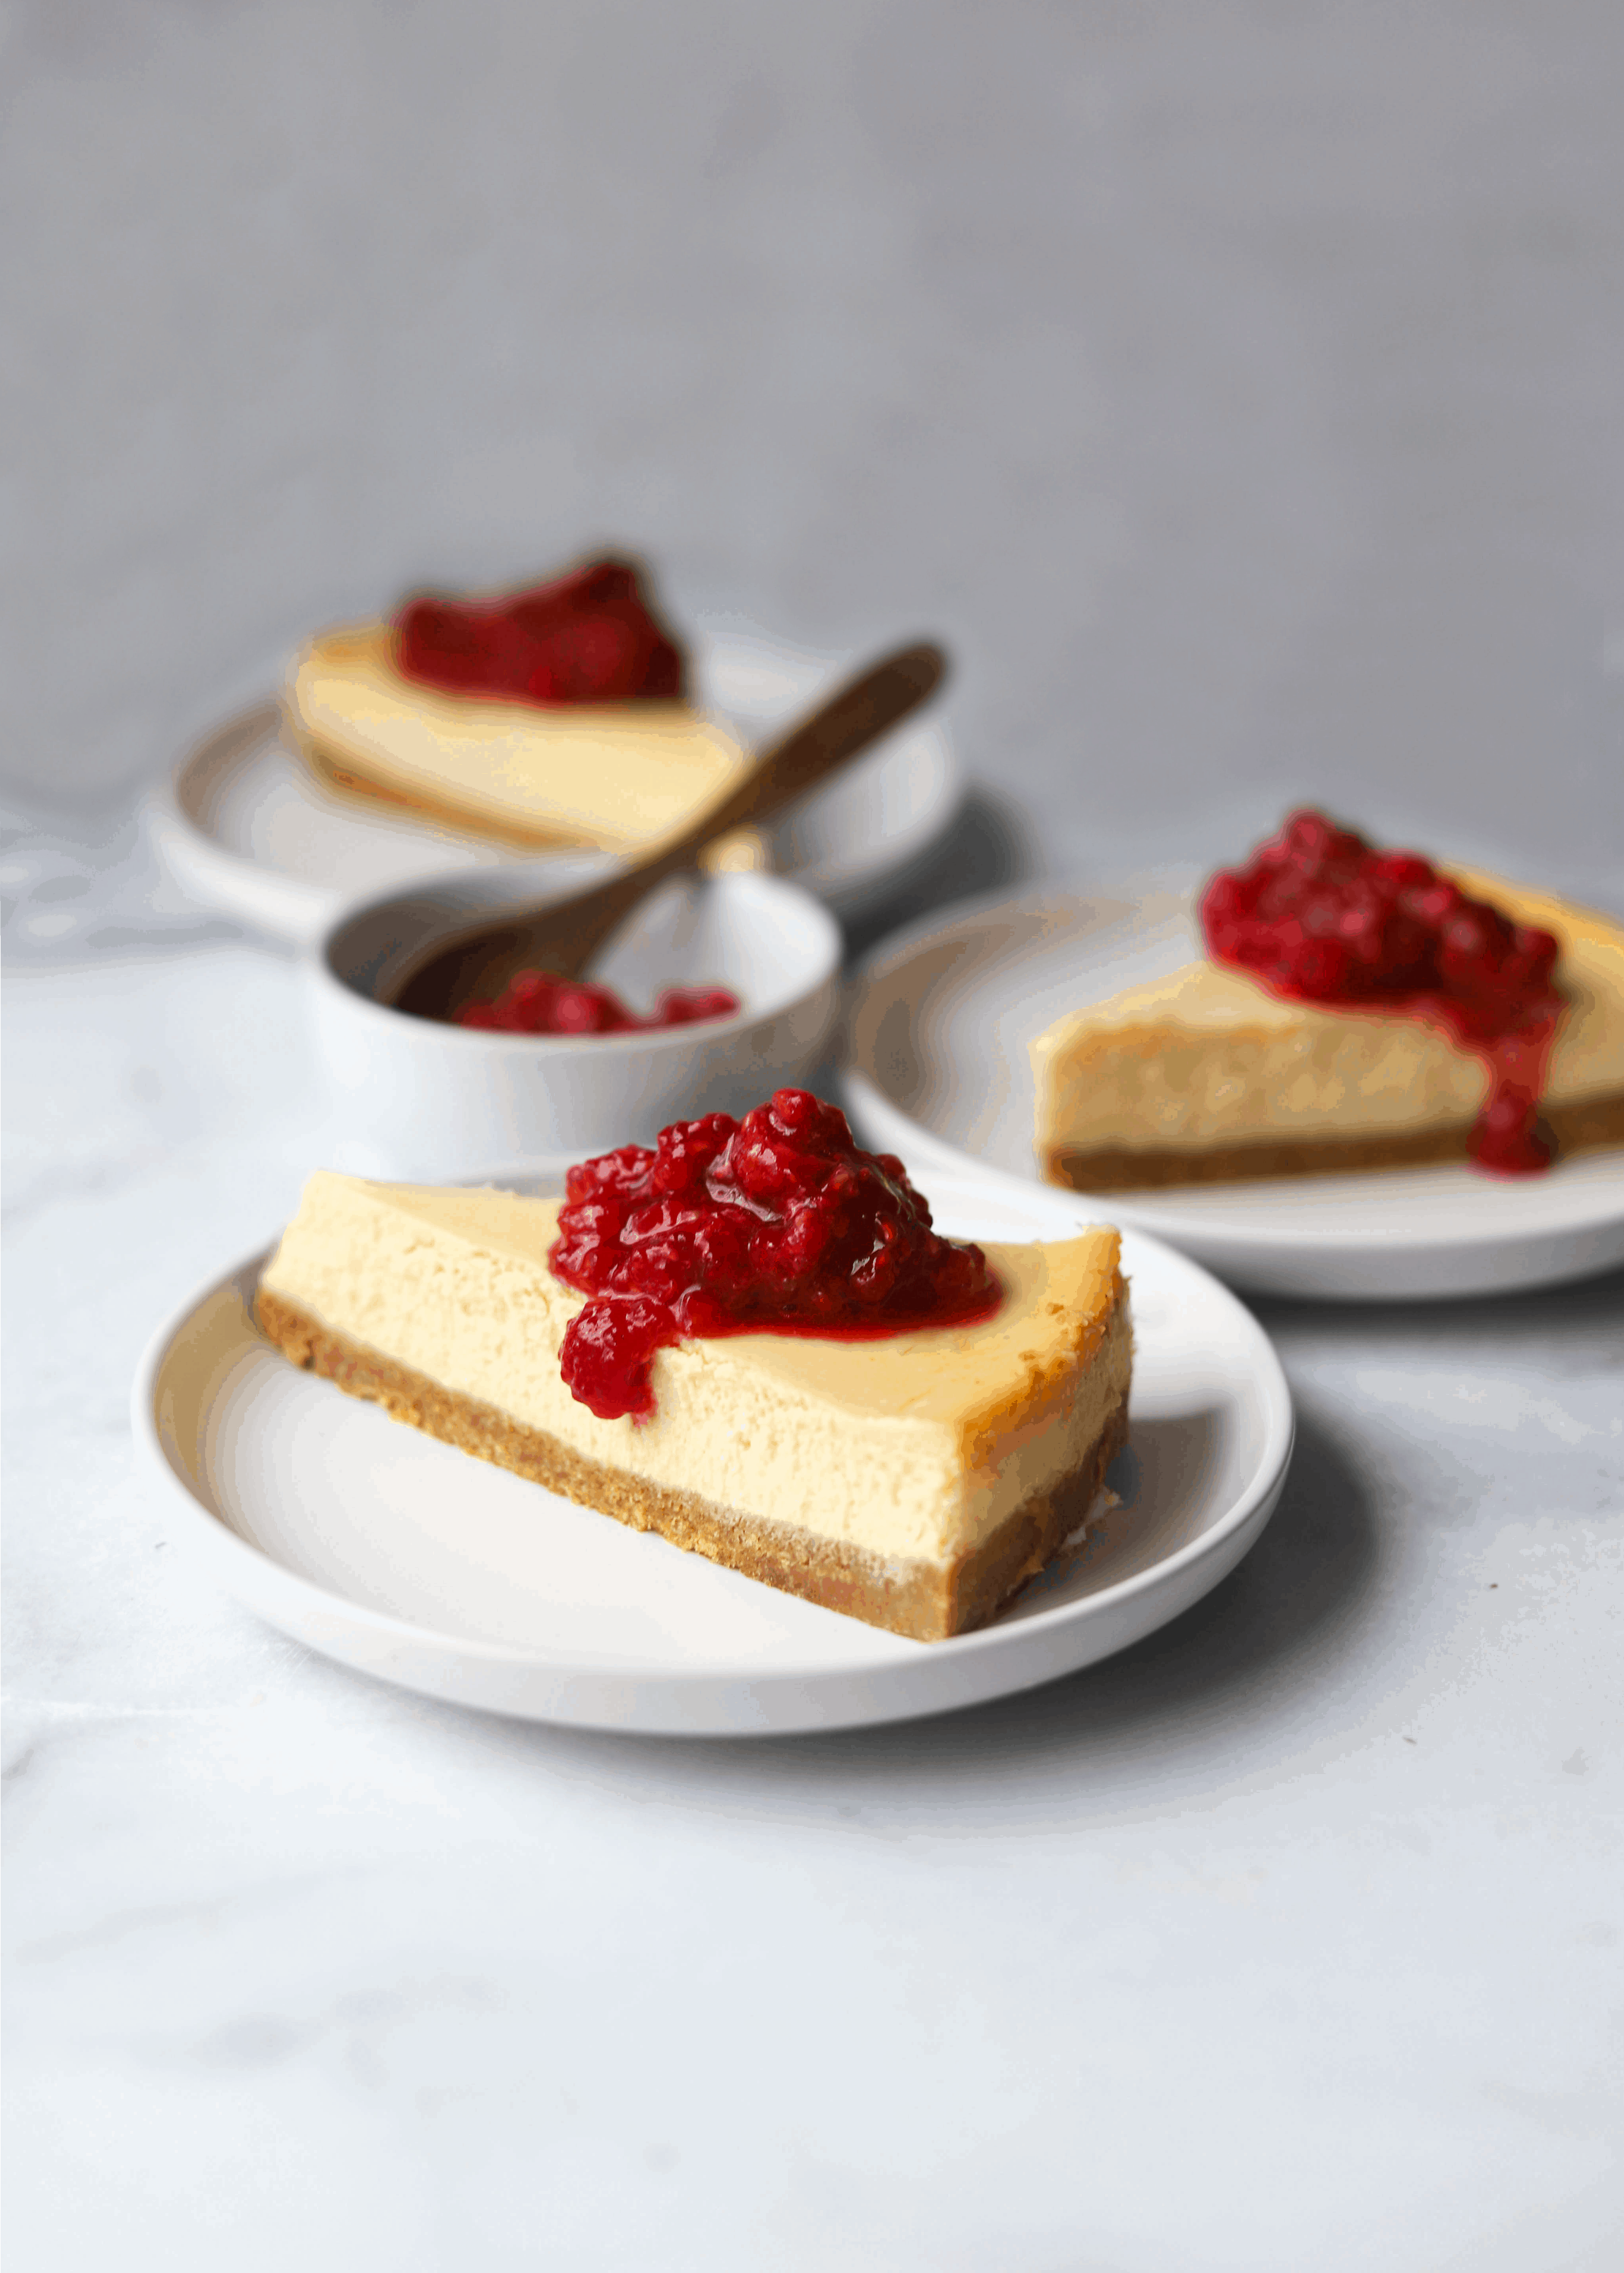 Three slices of cheesecake on white plates with a small bowl of raspberries.